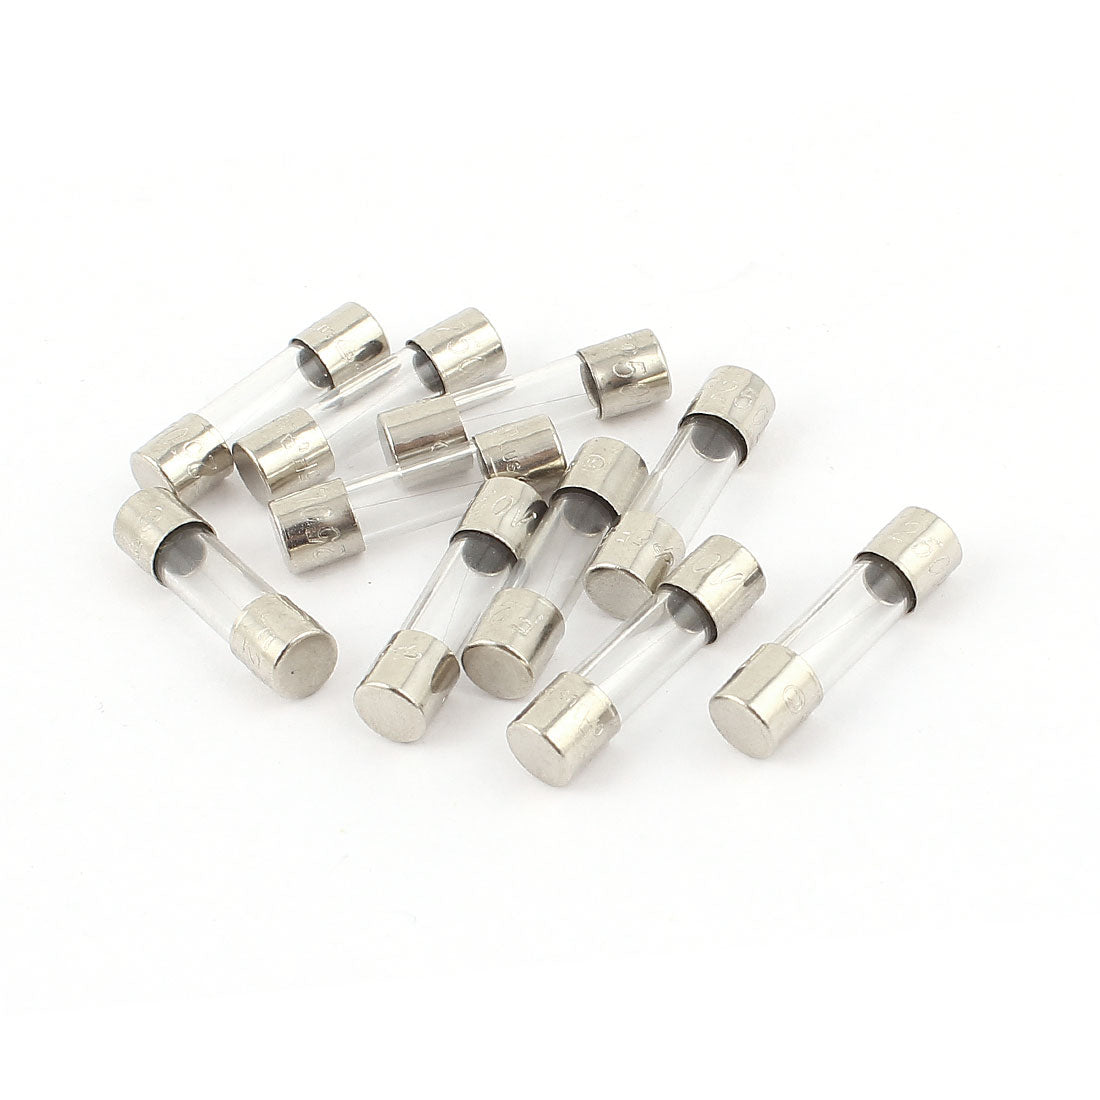 uxcell Uxcell 10Pcs 250V 250mA 0.25A Quick Blow Glass Fuses Tubes 5mm x 20mm